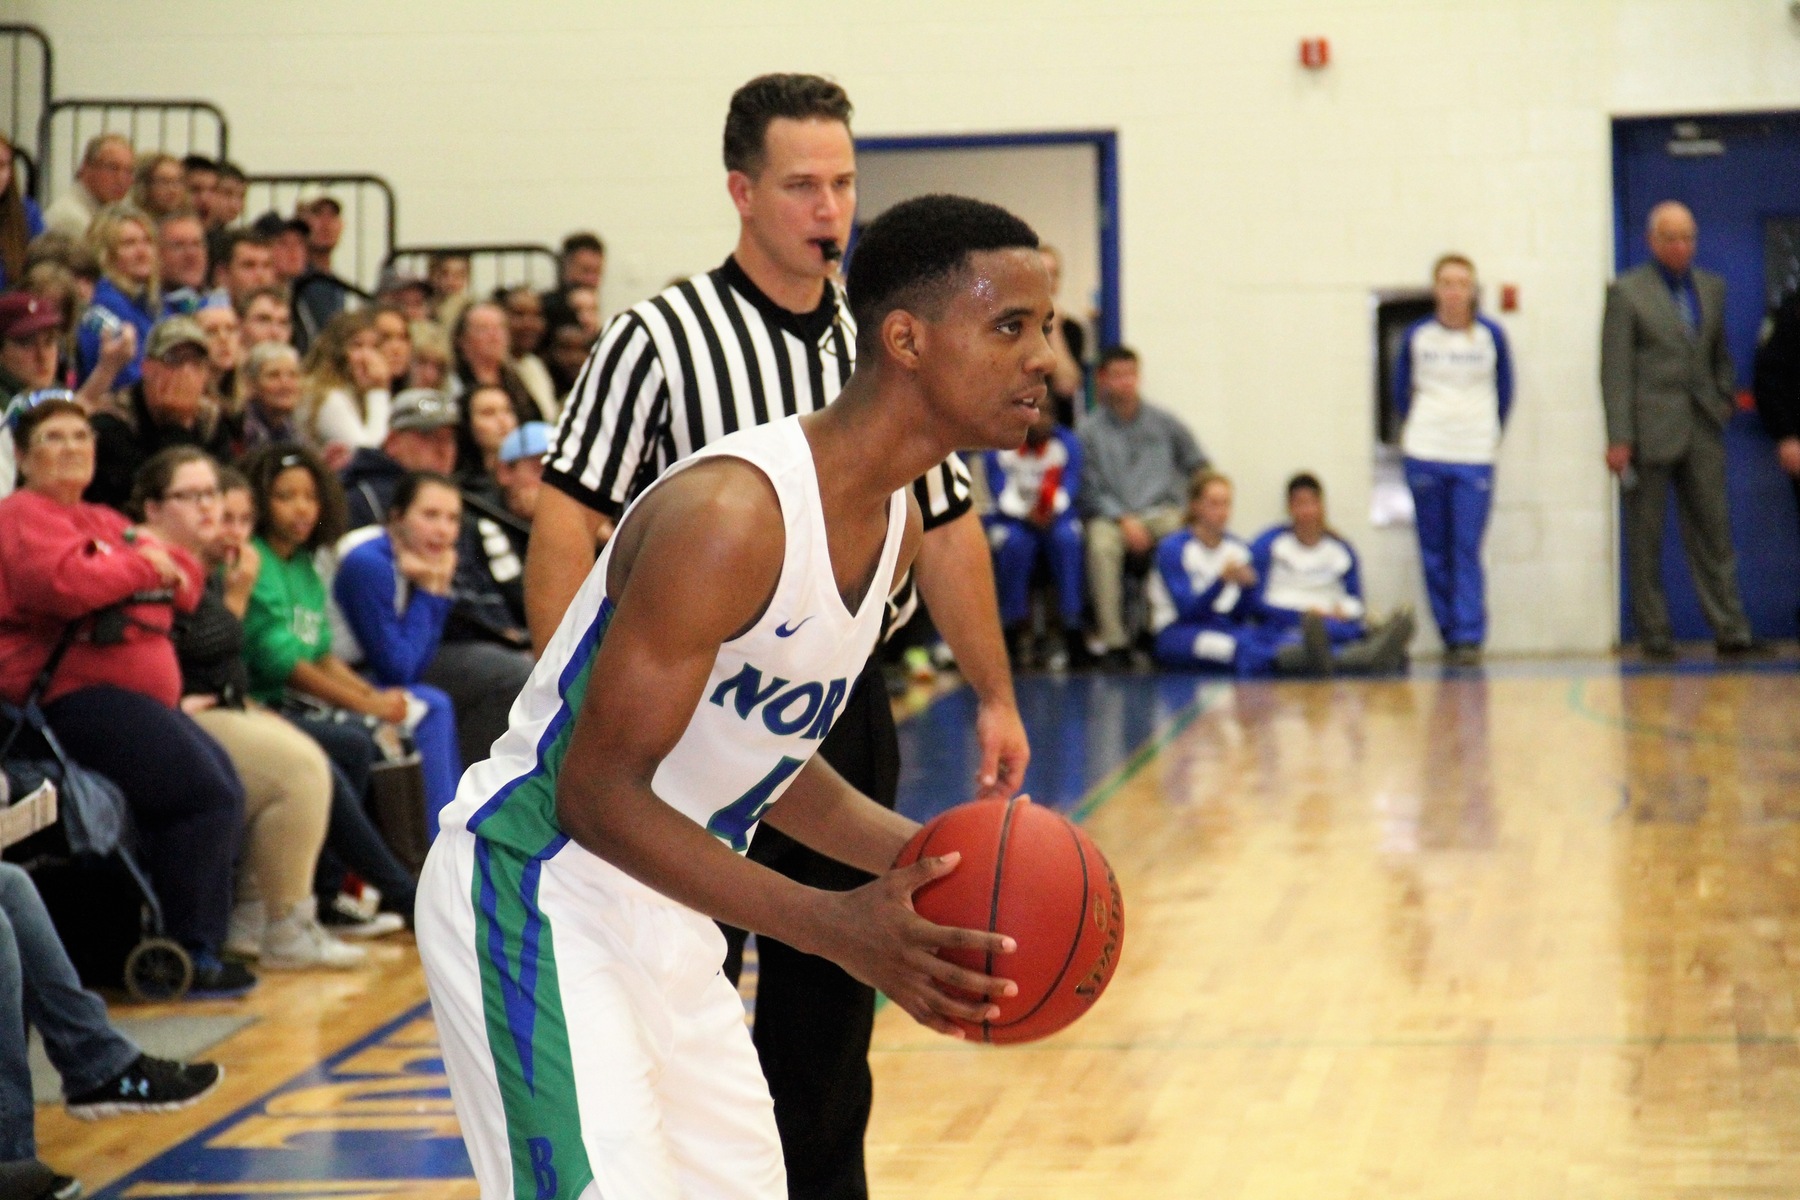 Alfonzo Fields holds the ball in front of an full gym of spectators